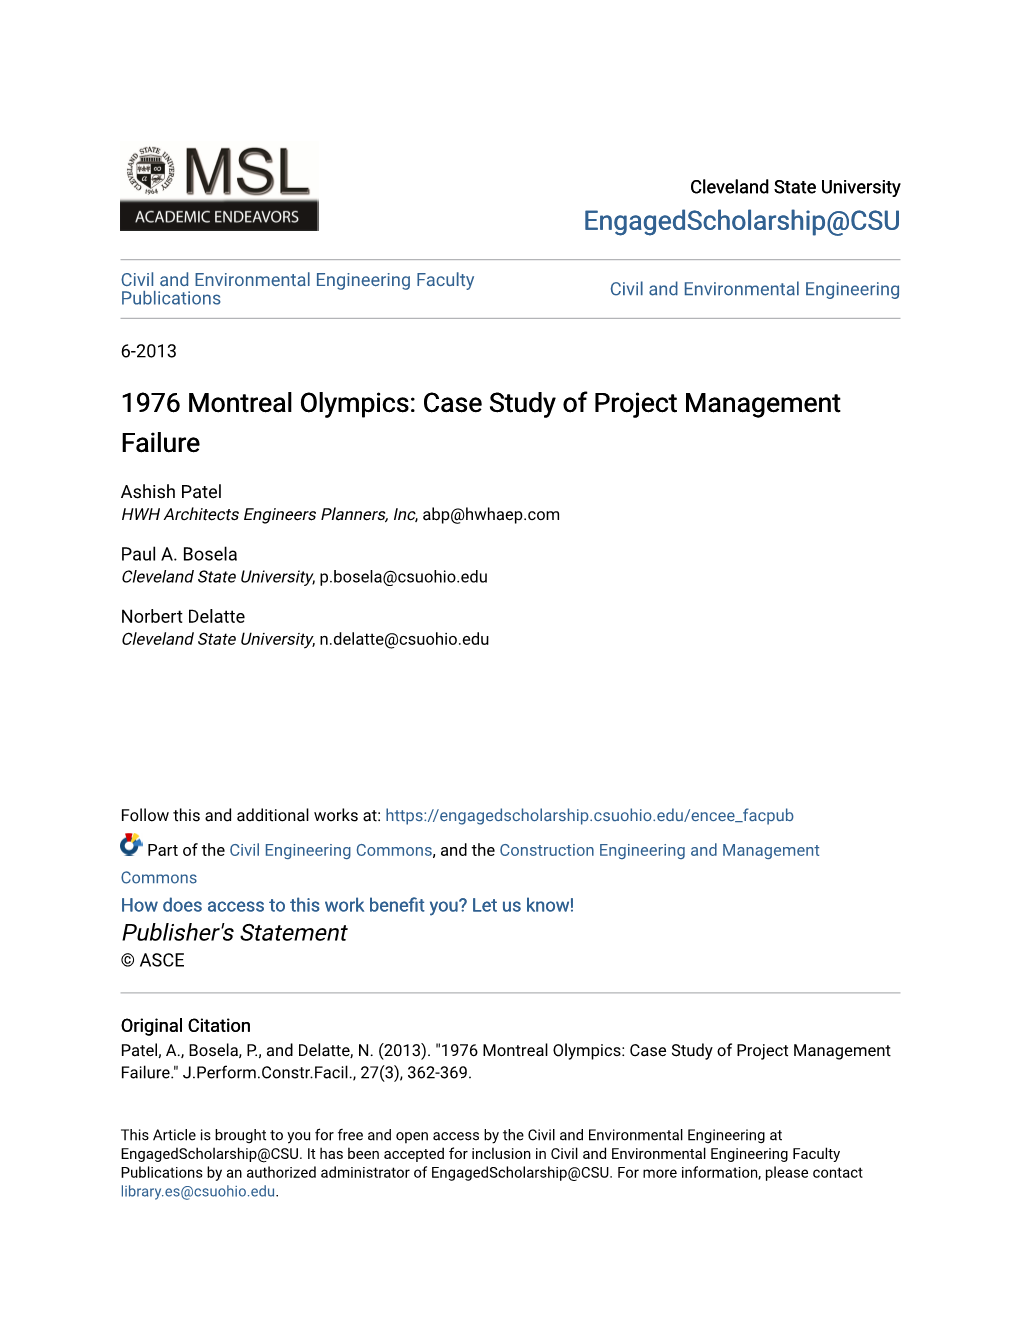 1976 Montreal Olympics: Case Study of Project Management Failure